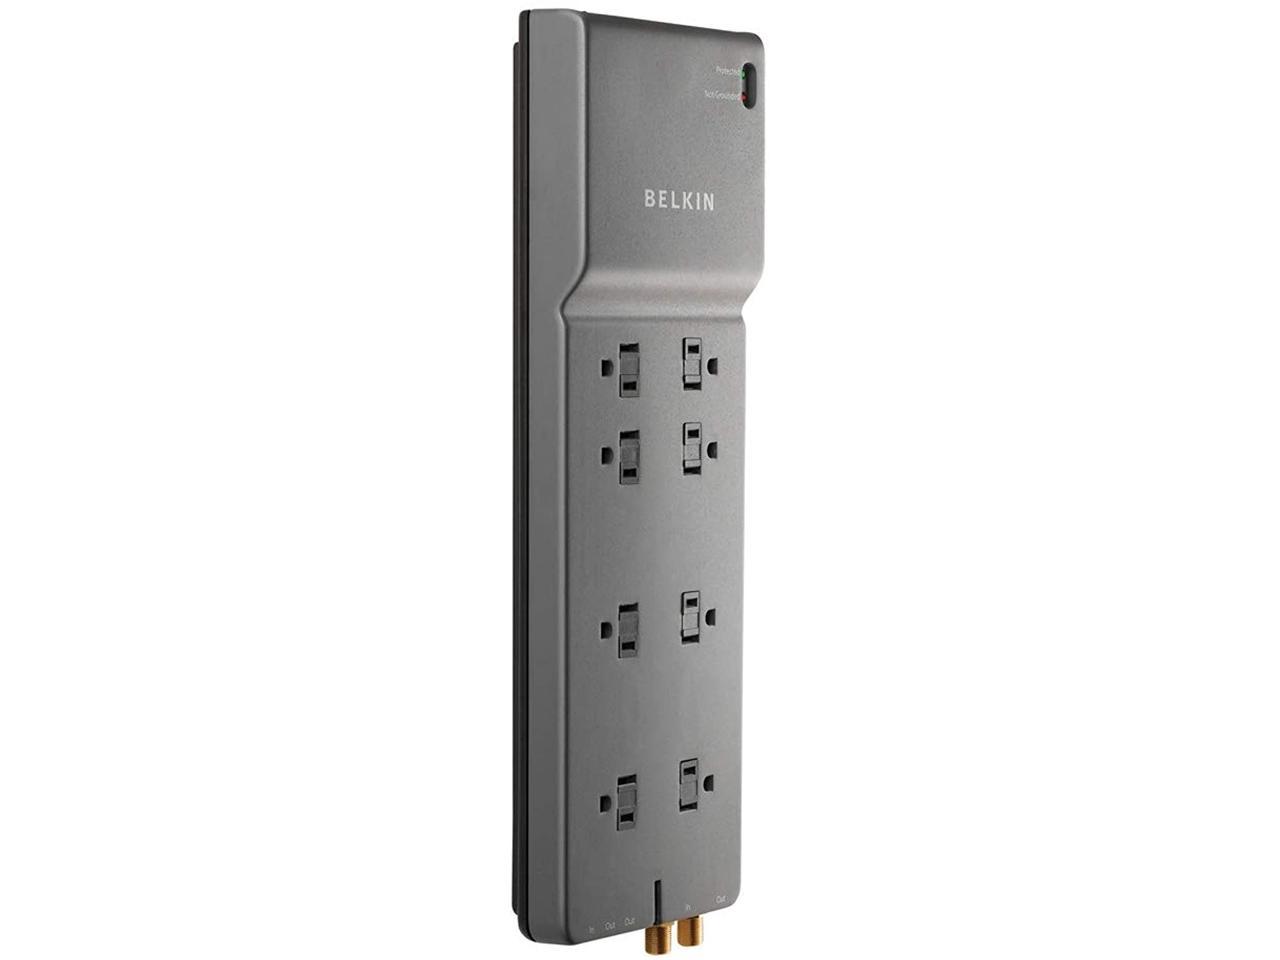 Belkin BE108230-06 8-Outlet Power Strip Surge Protector w/Flat Plug, 6ft Cord (3,550 Joules),Black & BE107200-06 7-Outlet Power Strip Surge Protector w/6ft Cord (2,320 Joules), White,6'